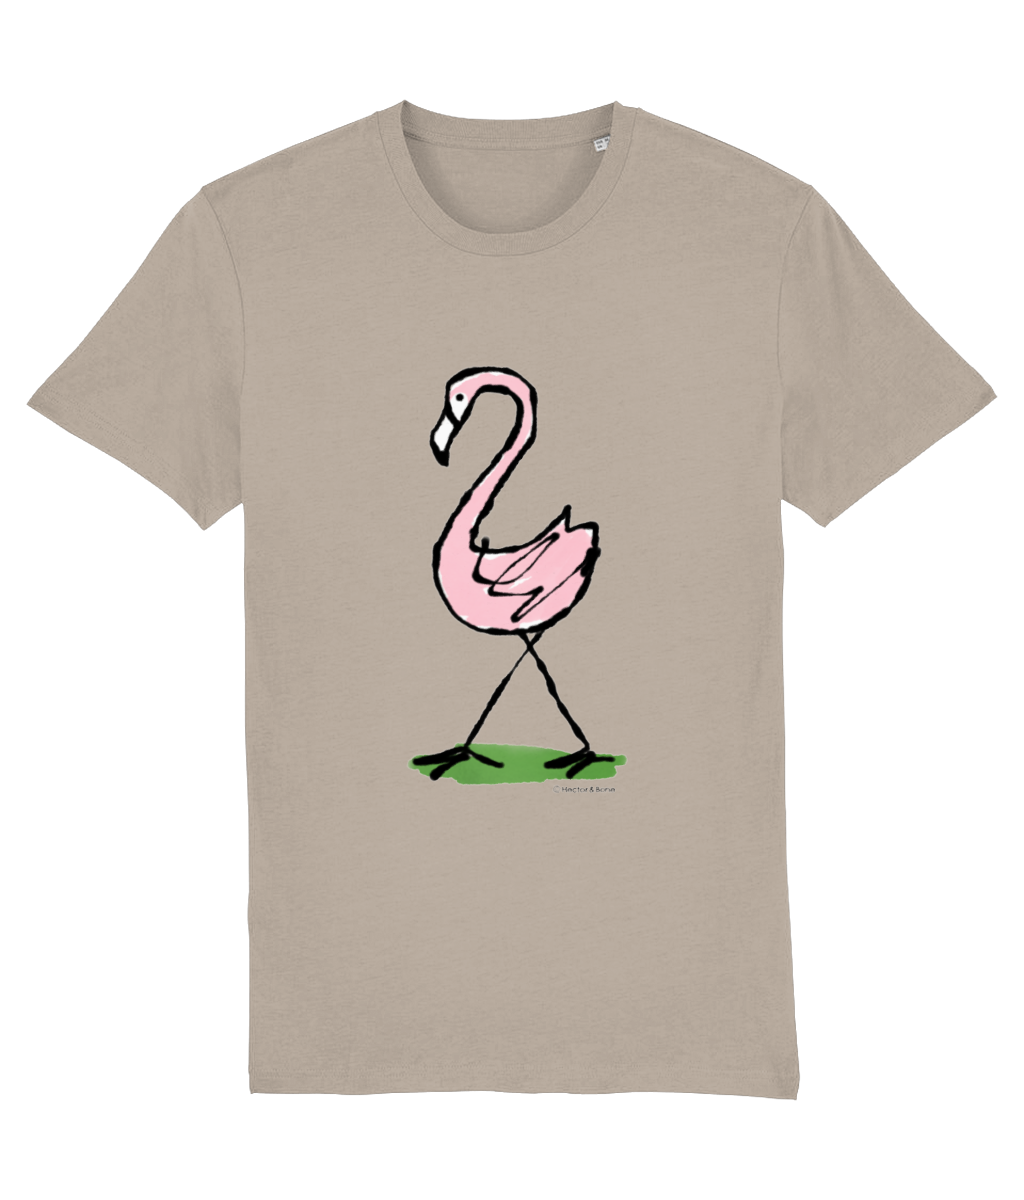 Pink Flamingo T-shirt - Illustrated flamingo design on sand colour vegan cotton unisex t-shirts by Hector and Bone